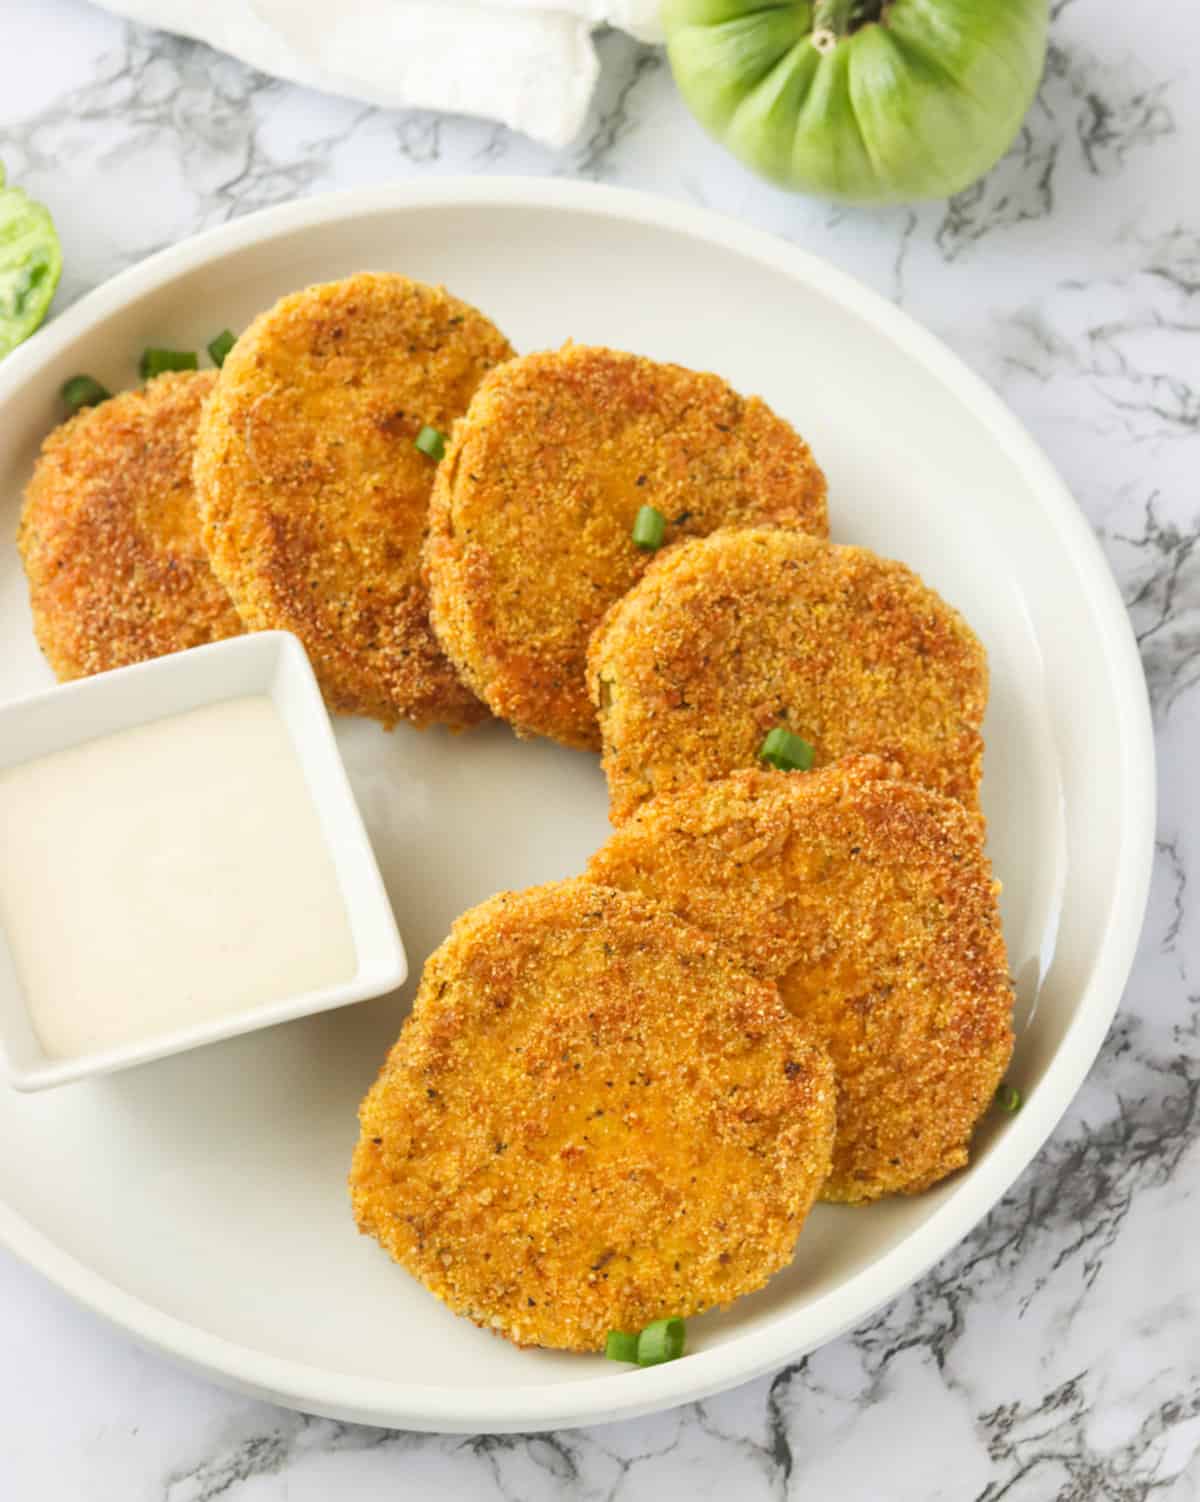 Fried remoulade and green tomatoes on a white plate